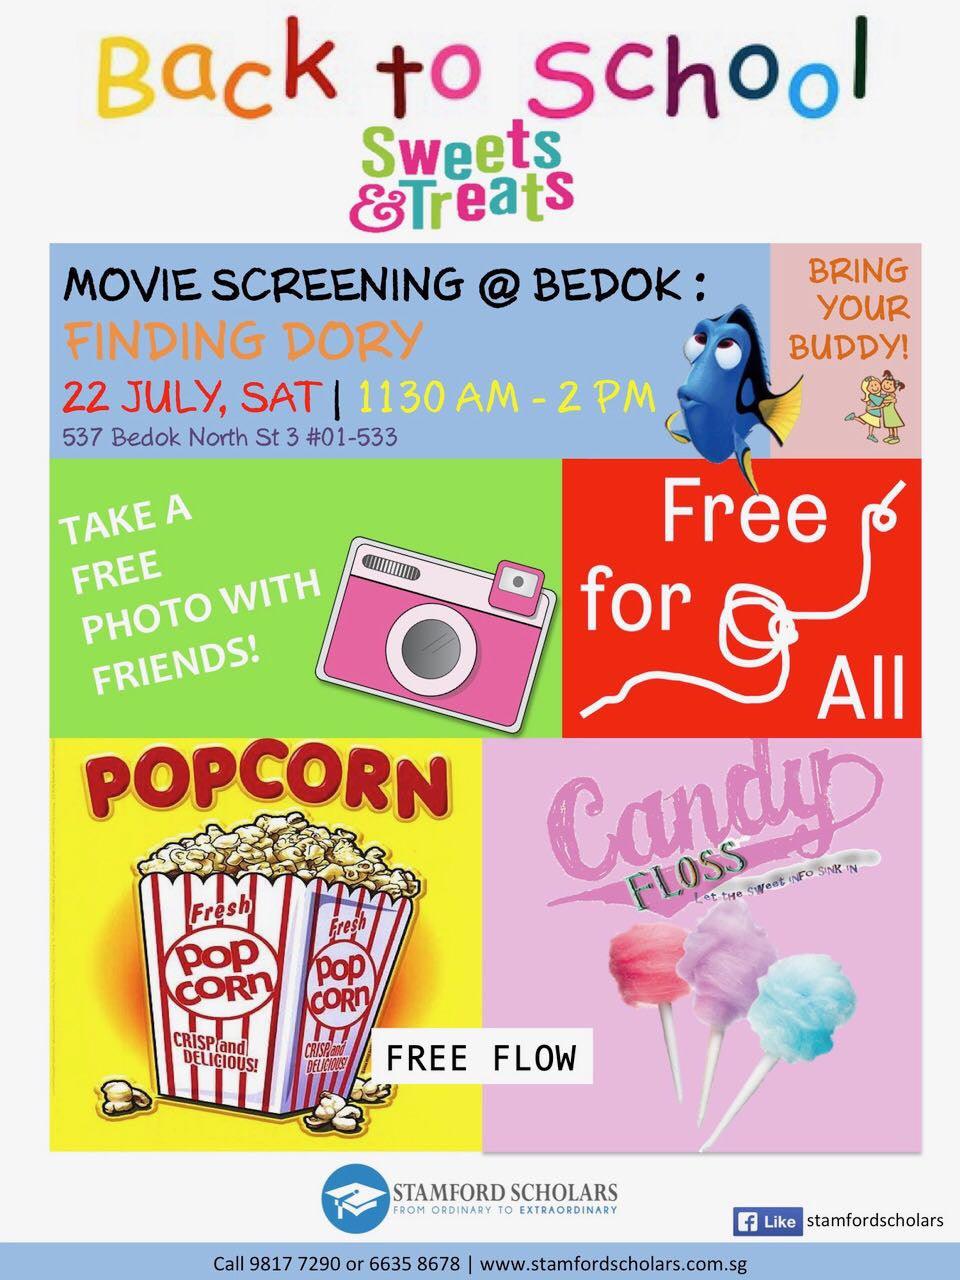 Things to do this Weekend: Free Movie Screening, Popcorn and Candy Floss @ Stamford Scholars Bedok